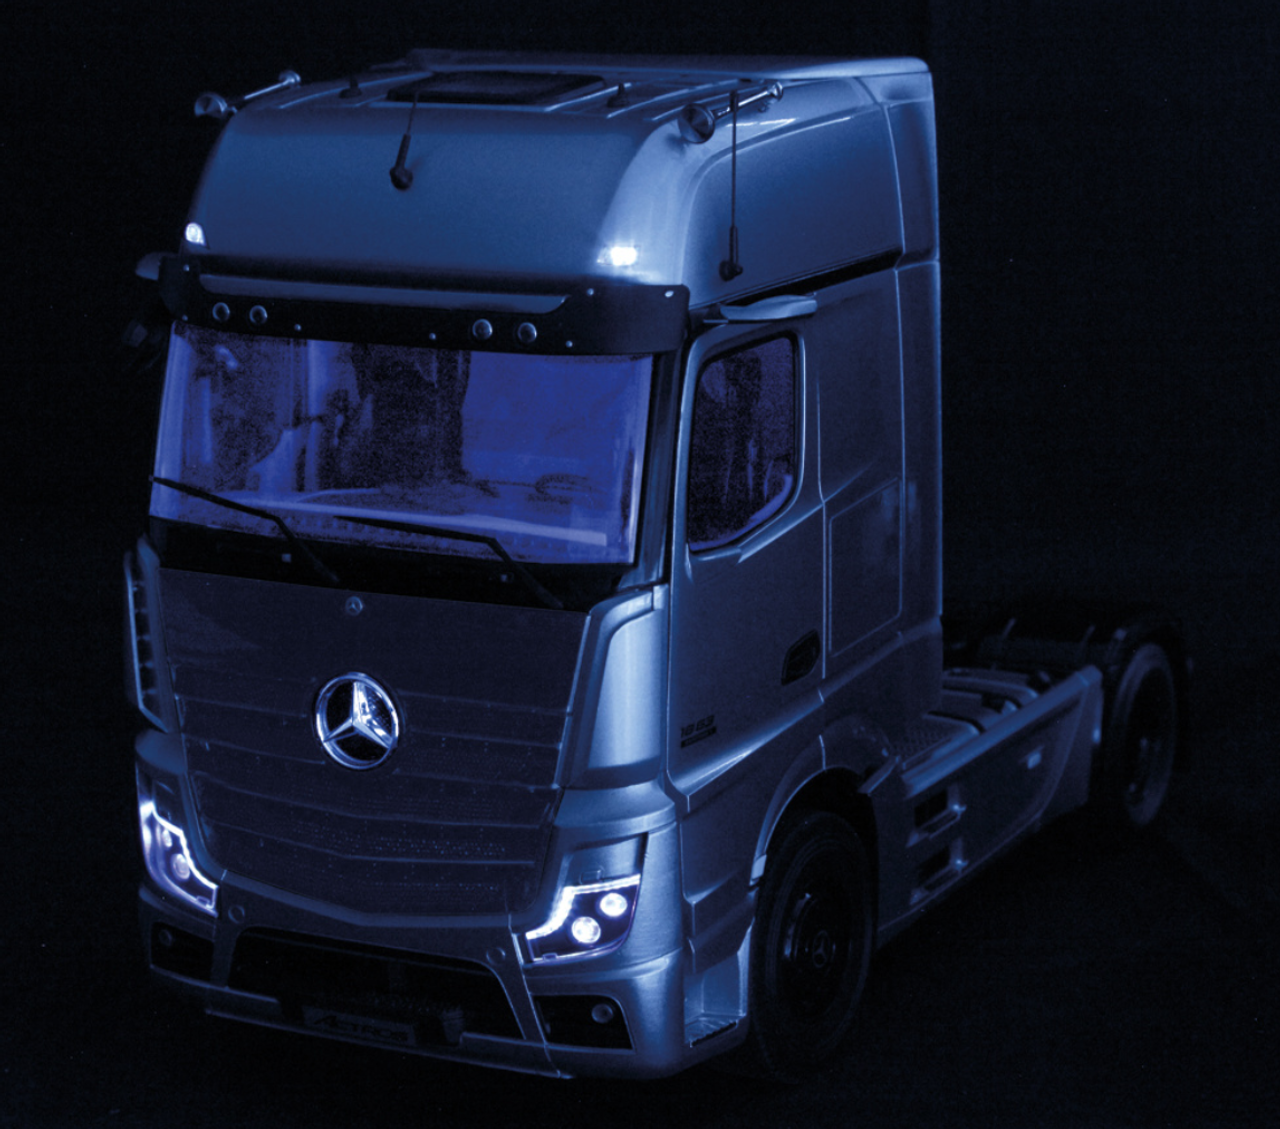 1/18 NZG Mercedes-Benz Actros GigaSpace 4x2 "Edition 3" (Silver Grey) Diecast Car Model with Lights